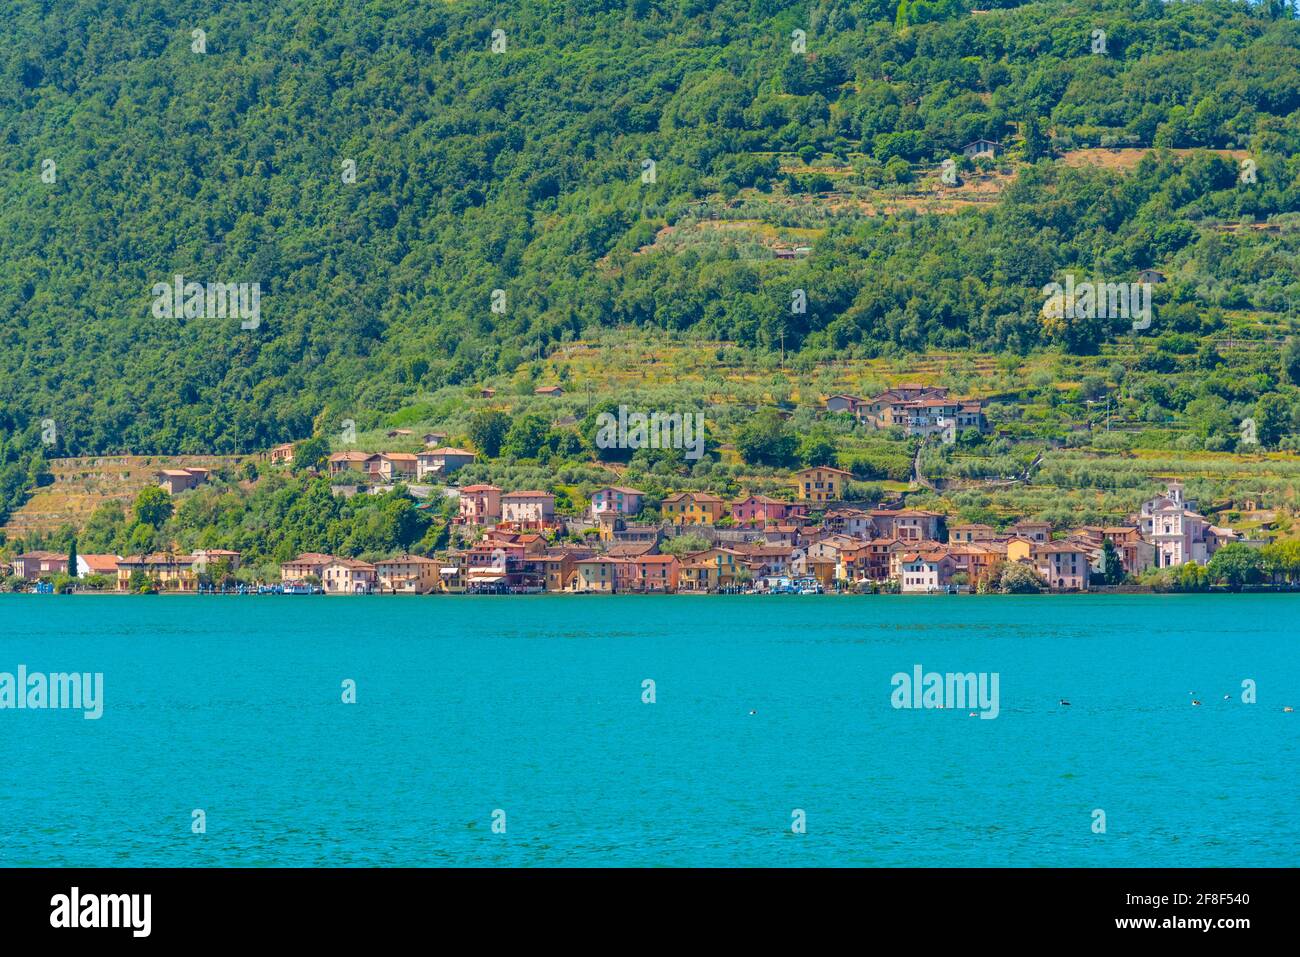 Carzano village on Monte Isola island at Iseo lake in Italy Stock Photo